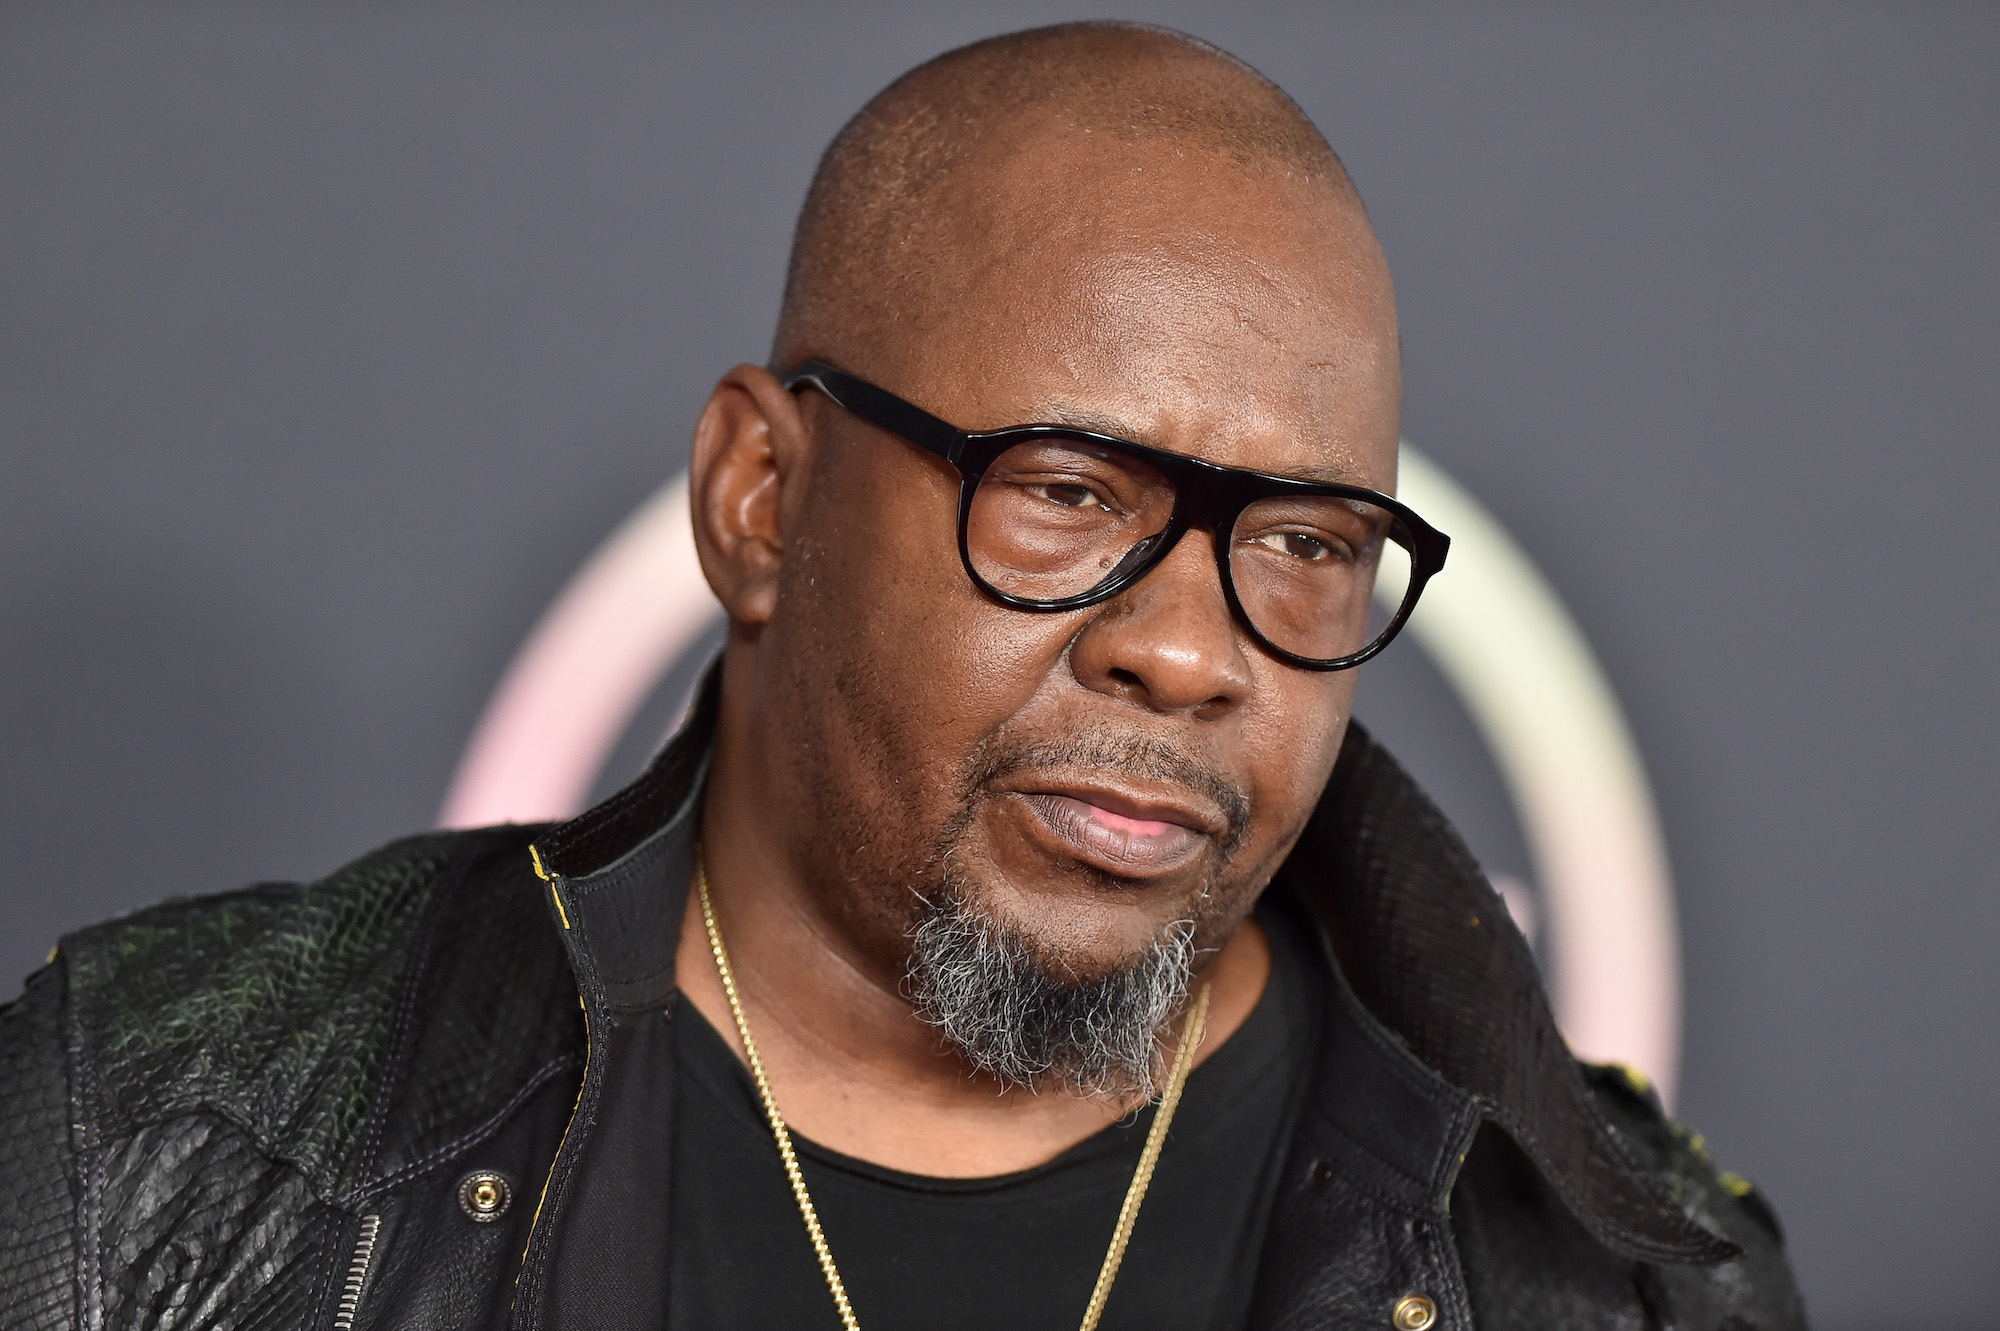 Bobby Brown wears glasses on the red carpet for the 2021 AMAs